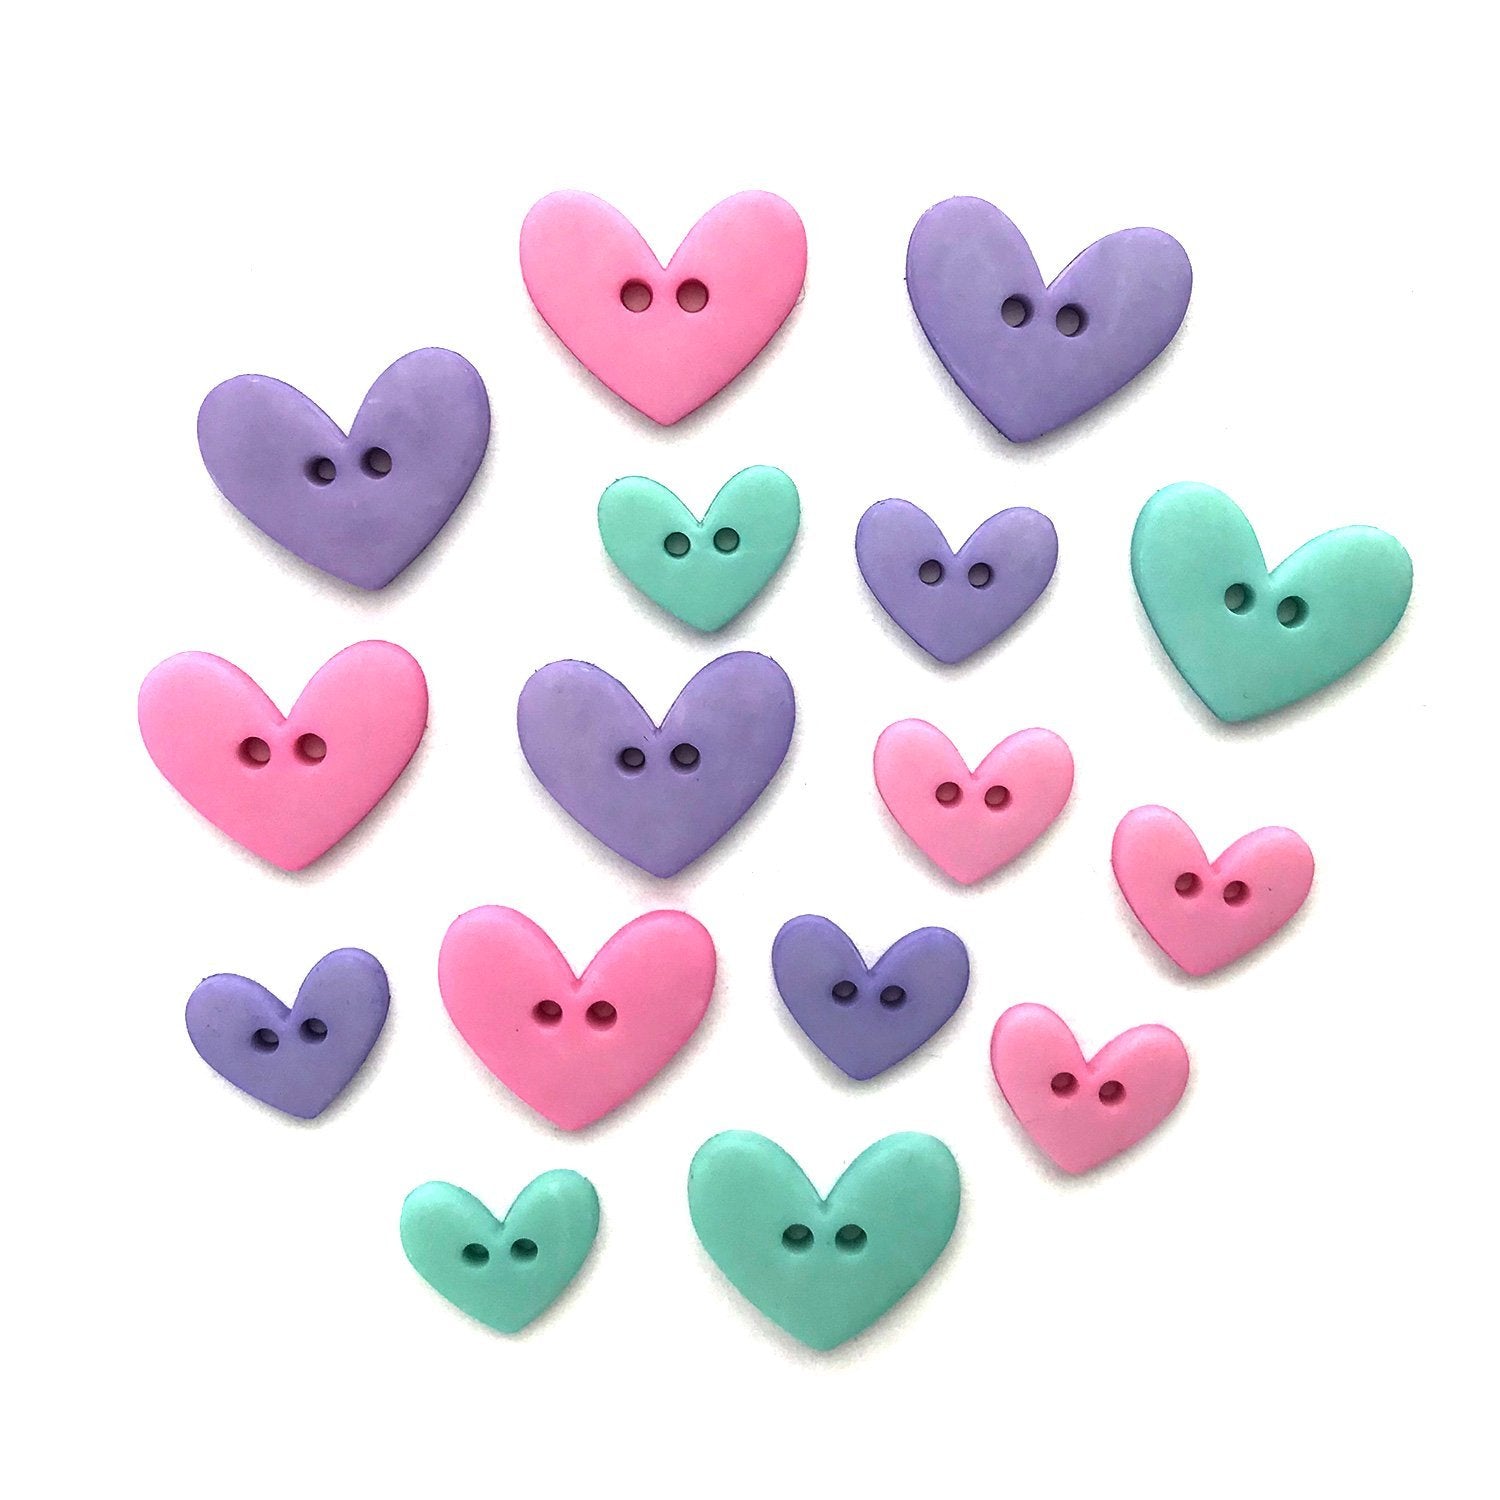 Heart  Buttons Galore and More